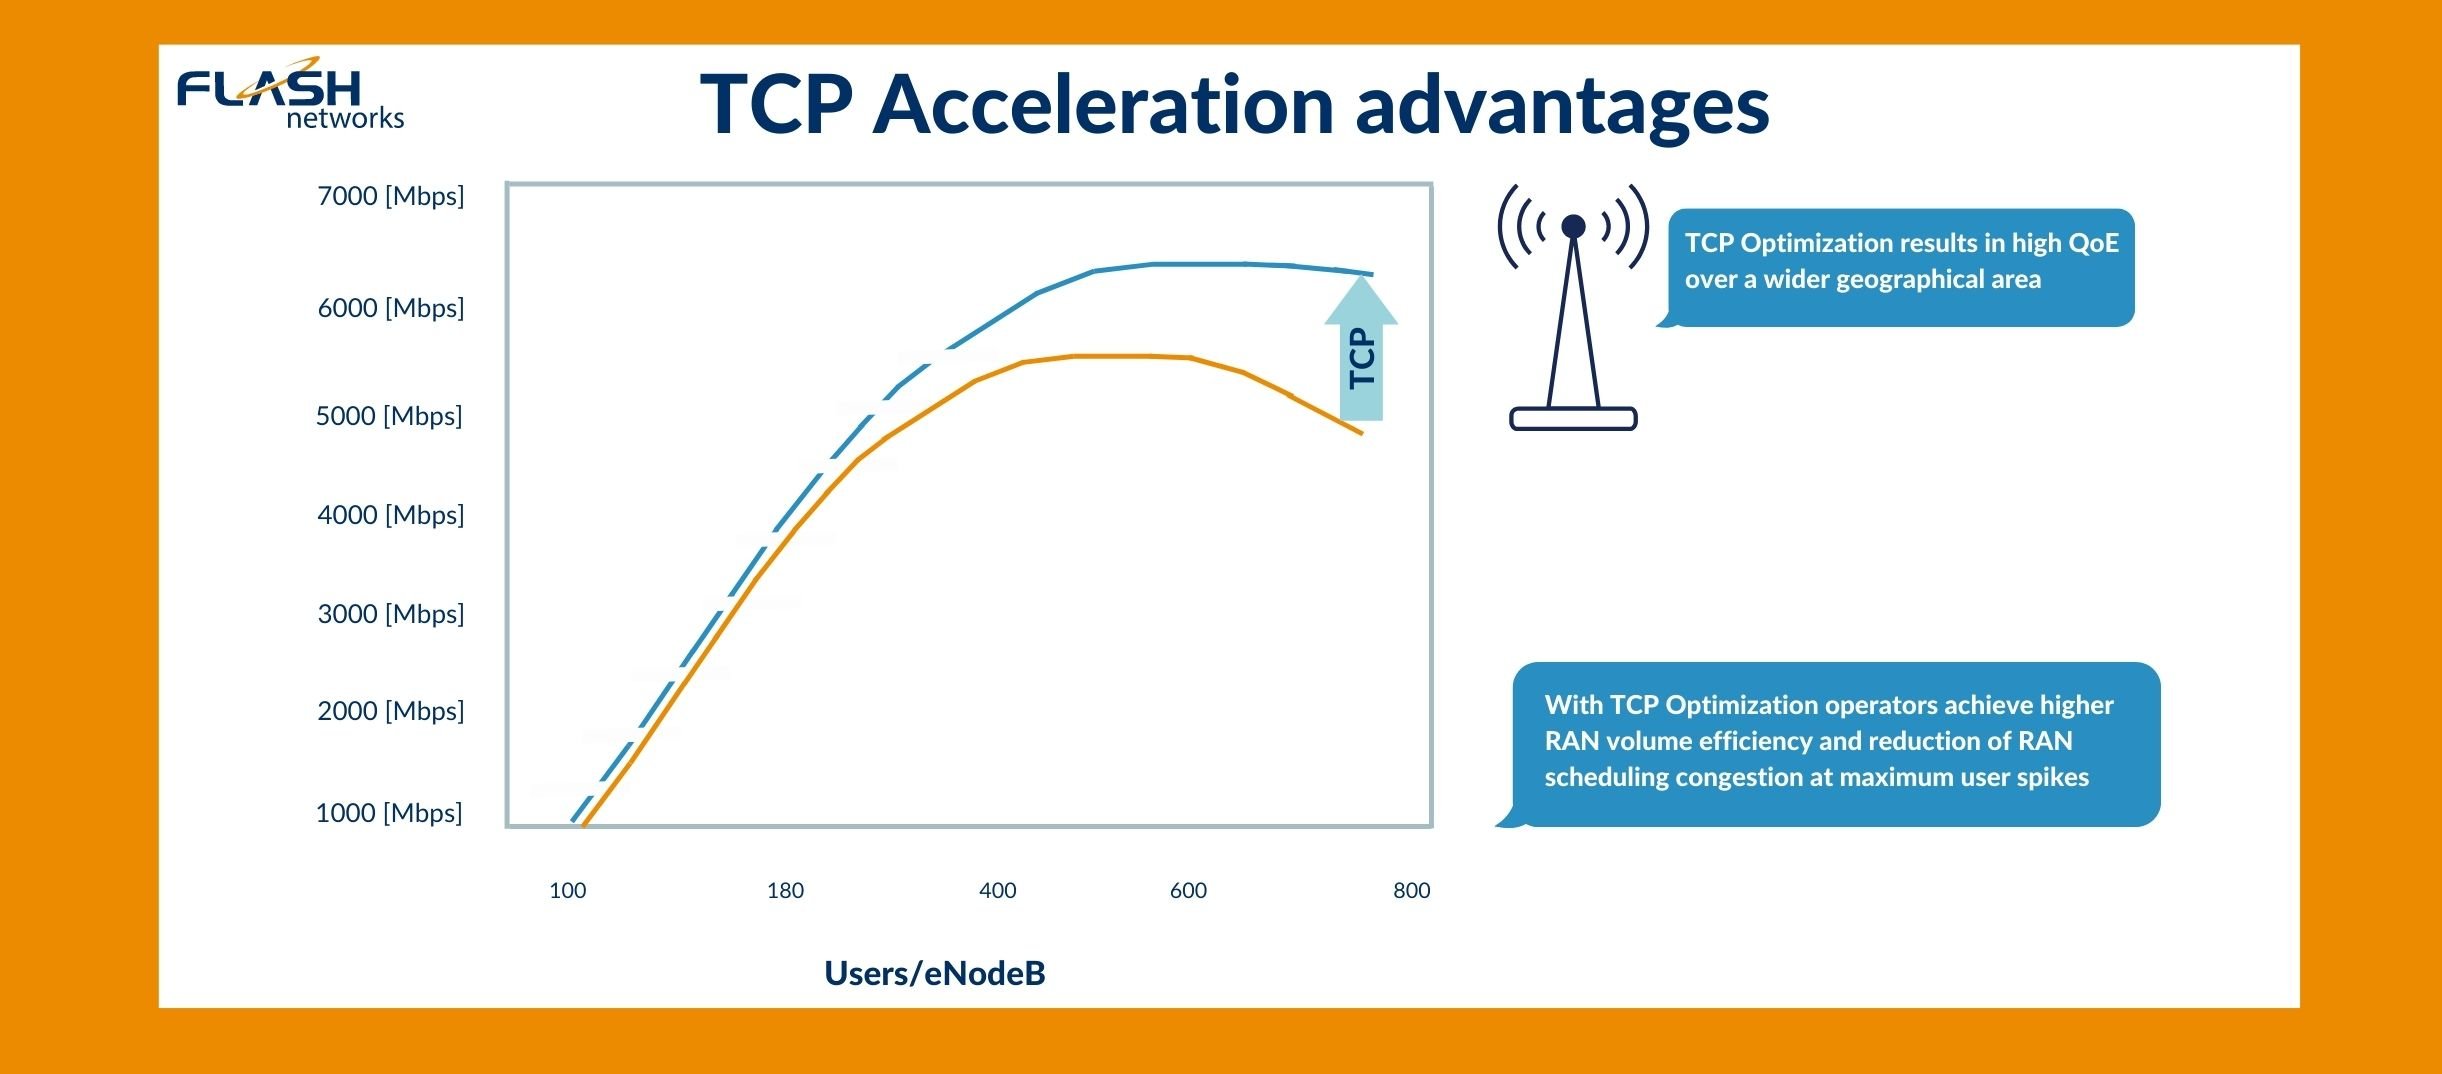 How TCP acceleration works - explanation